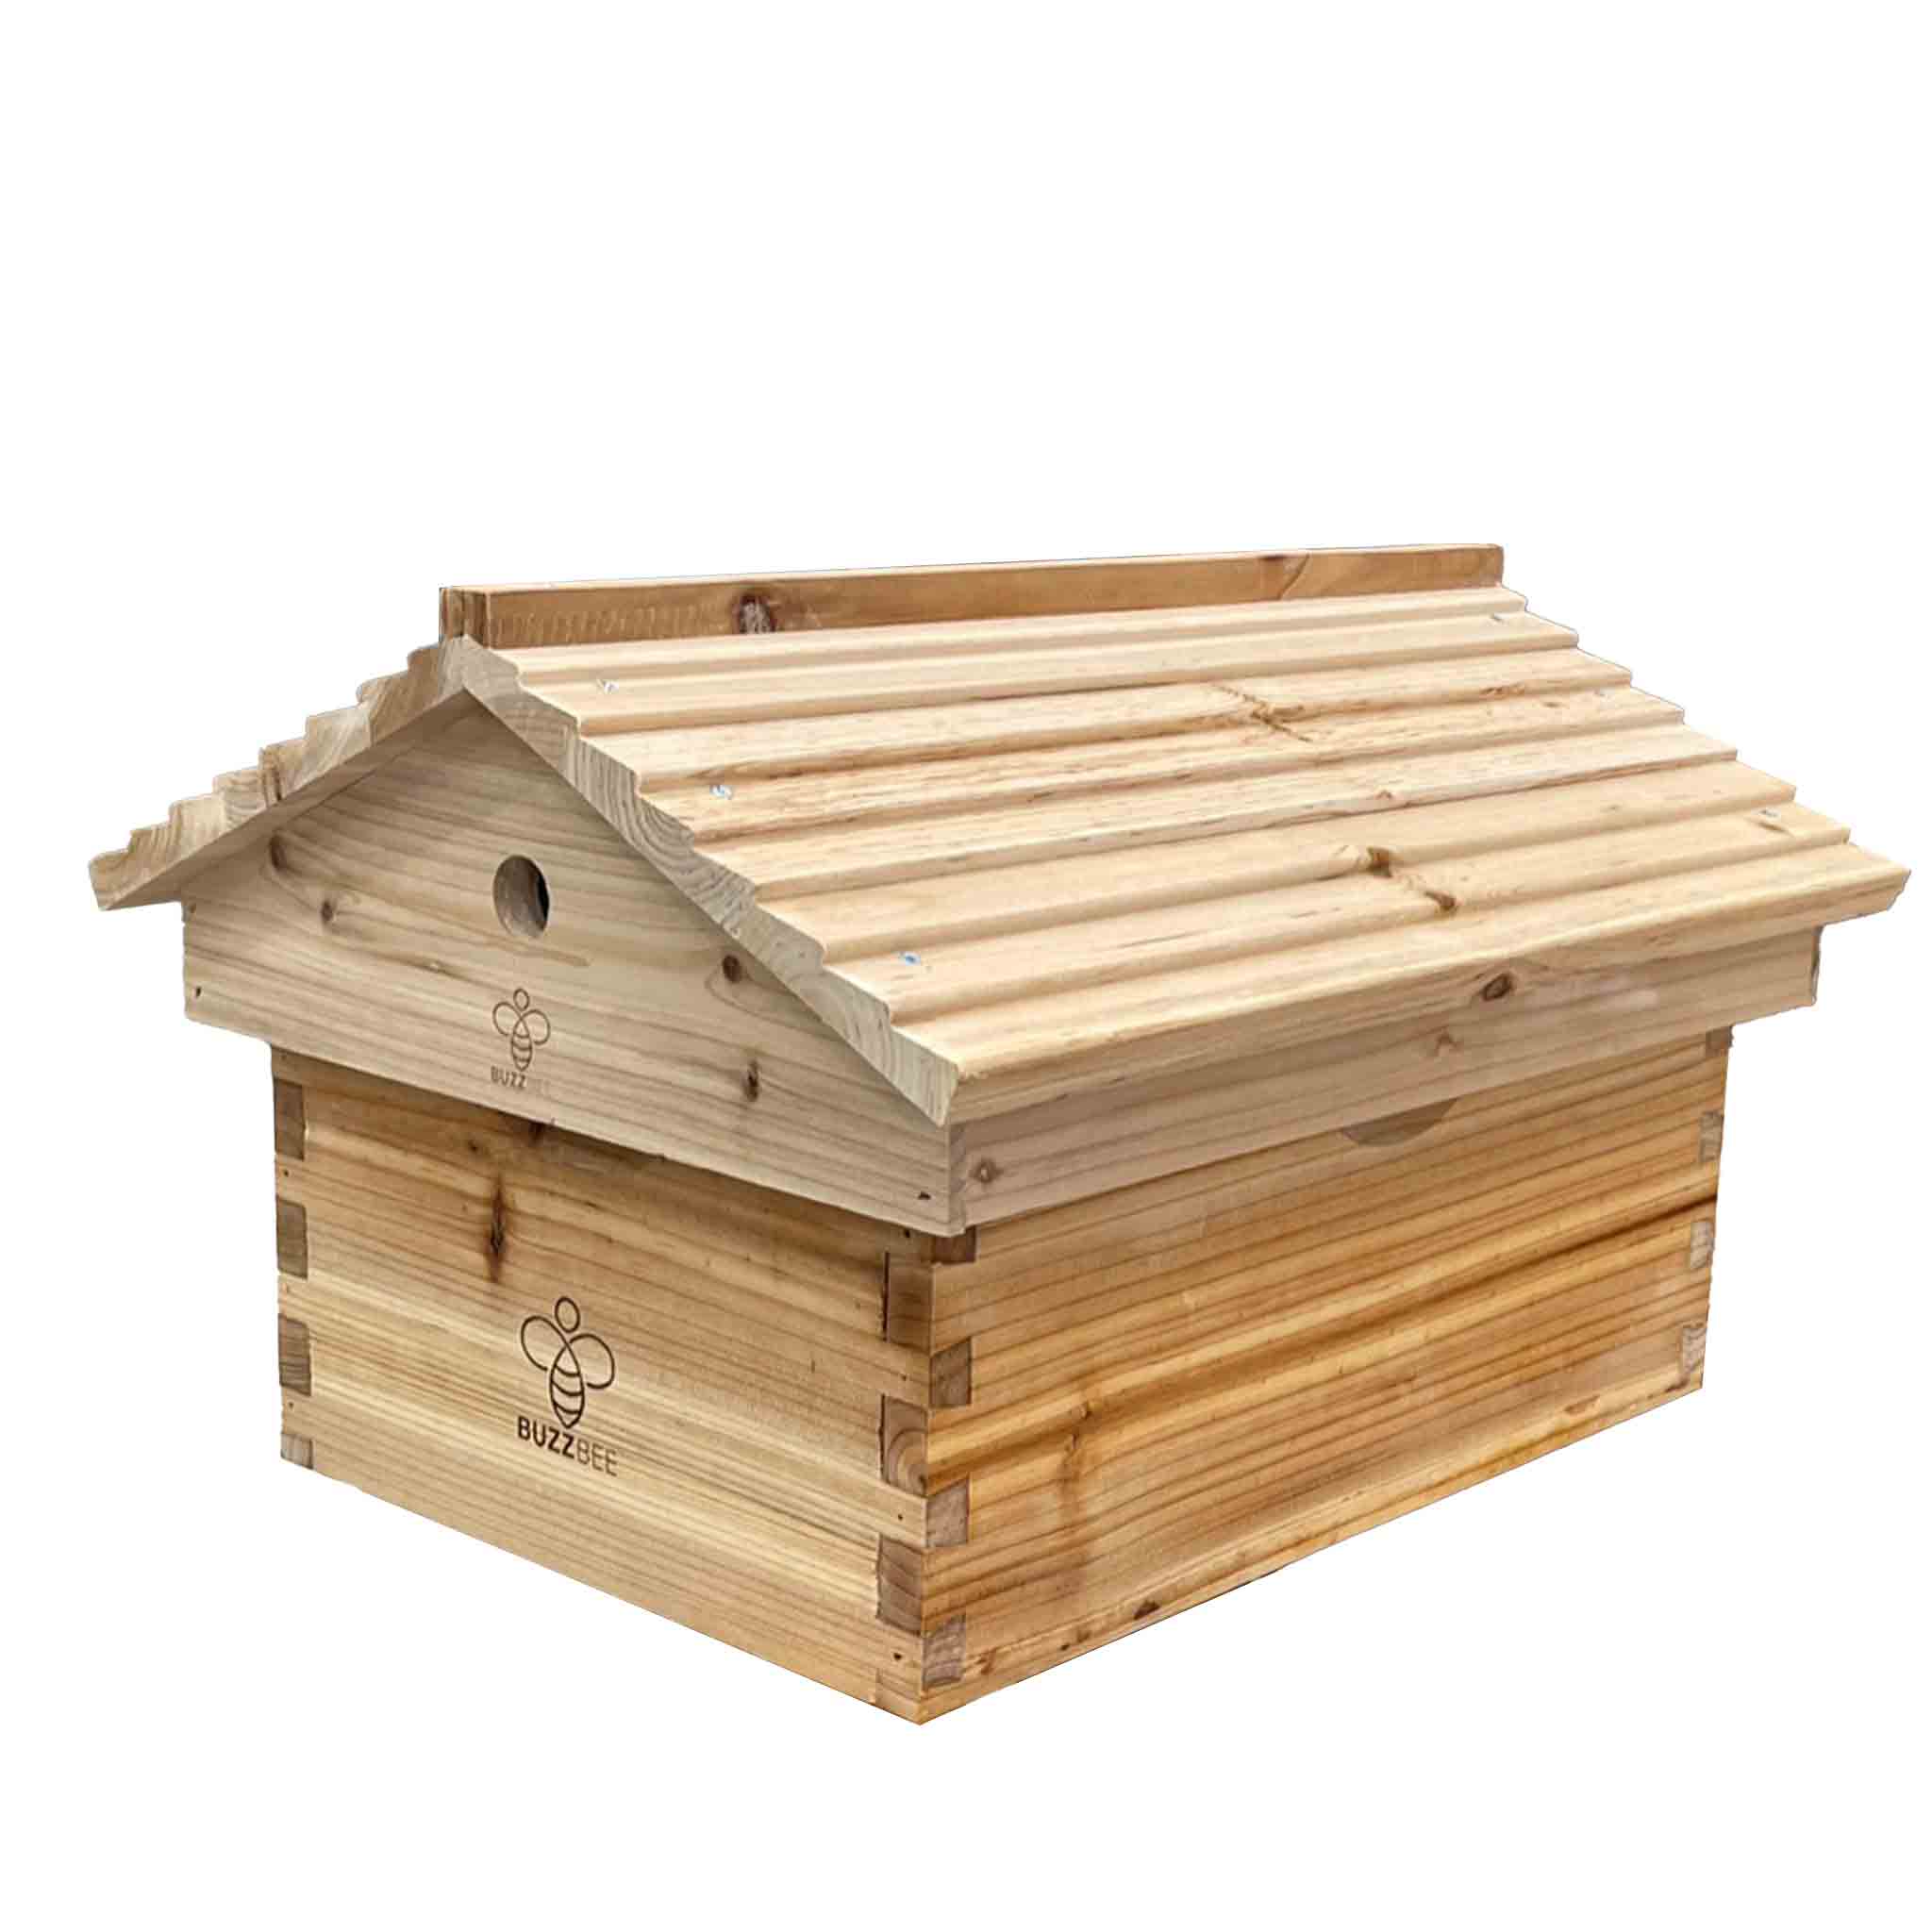 Gabled Lid/Roof/Outer Cover for your beehive - Hive Parts collection by Buzzbee Beekeeping Supplies